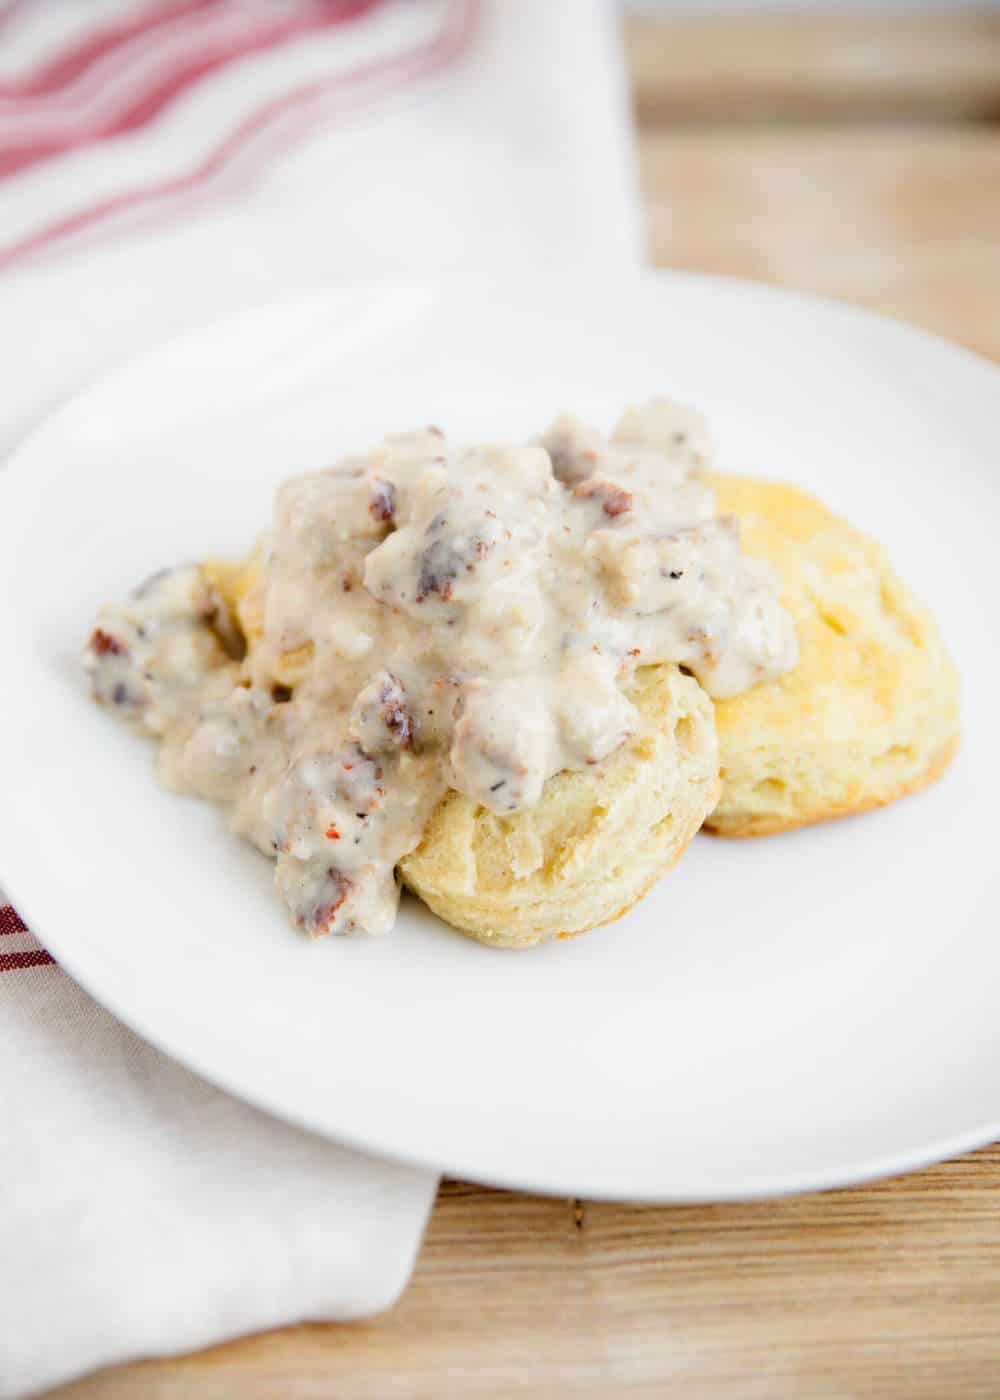 Biscuits and gravy on a white plate.